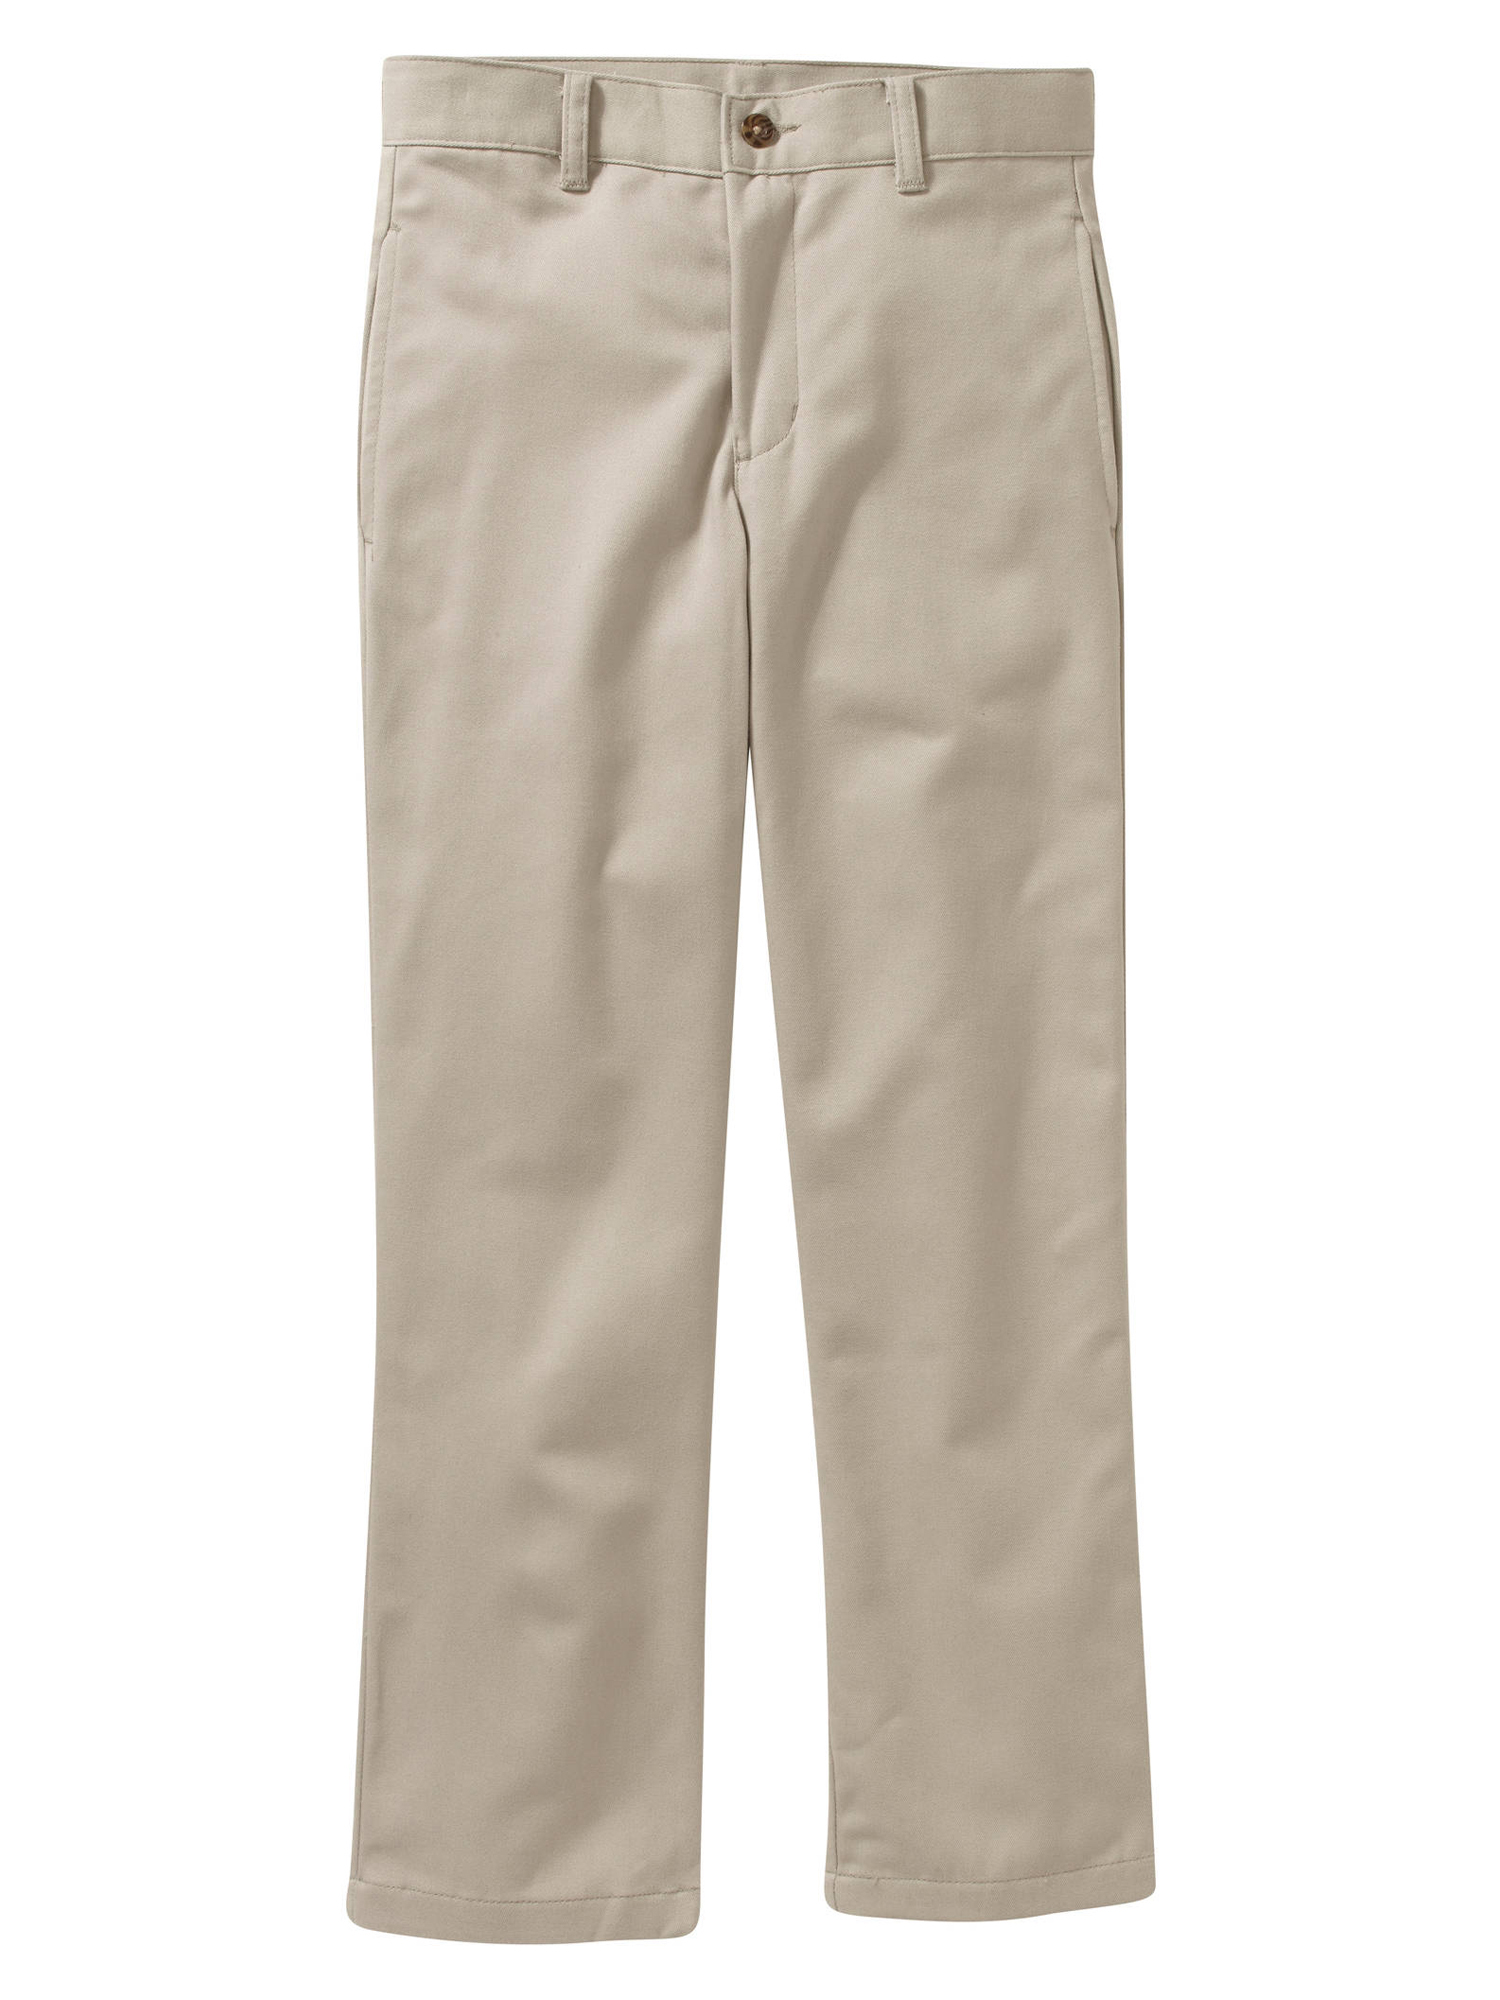 George Boys Flat Front Twill Pant With Scotchguard - image 1 of 3